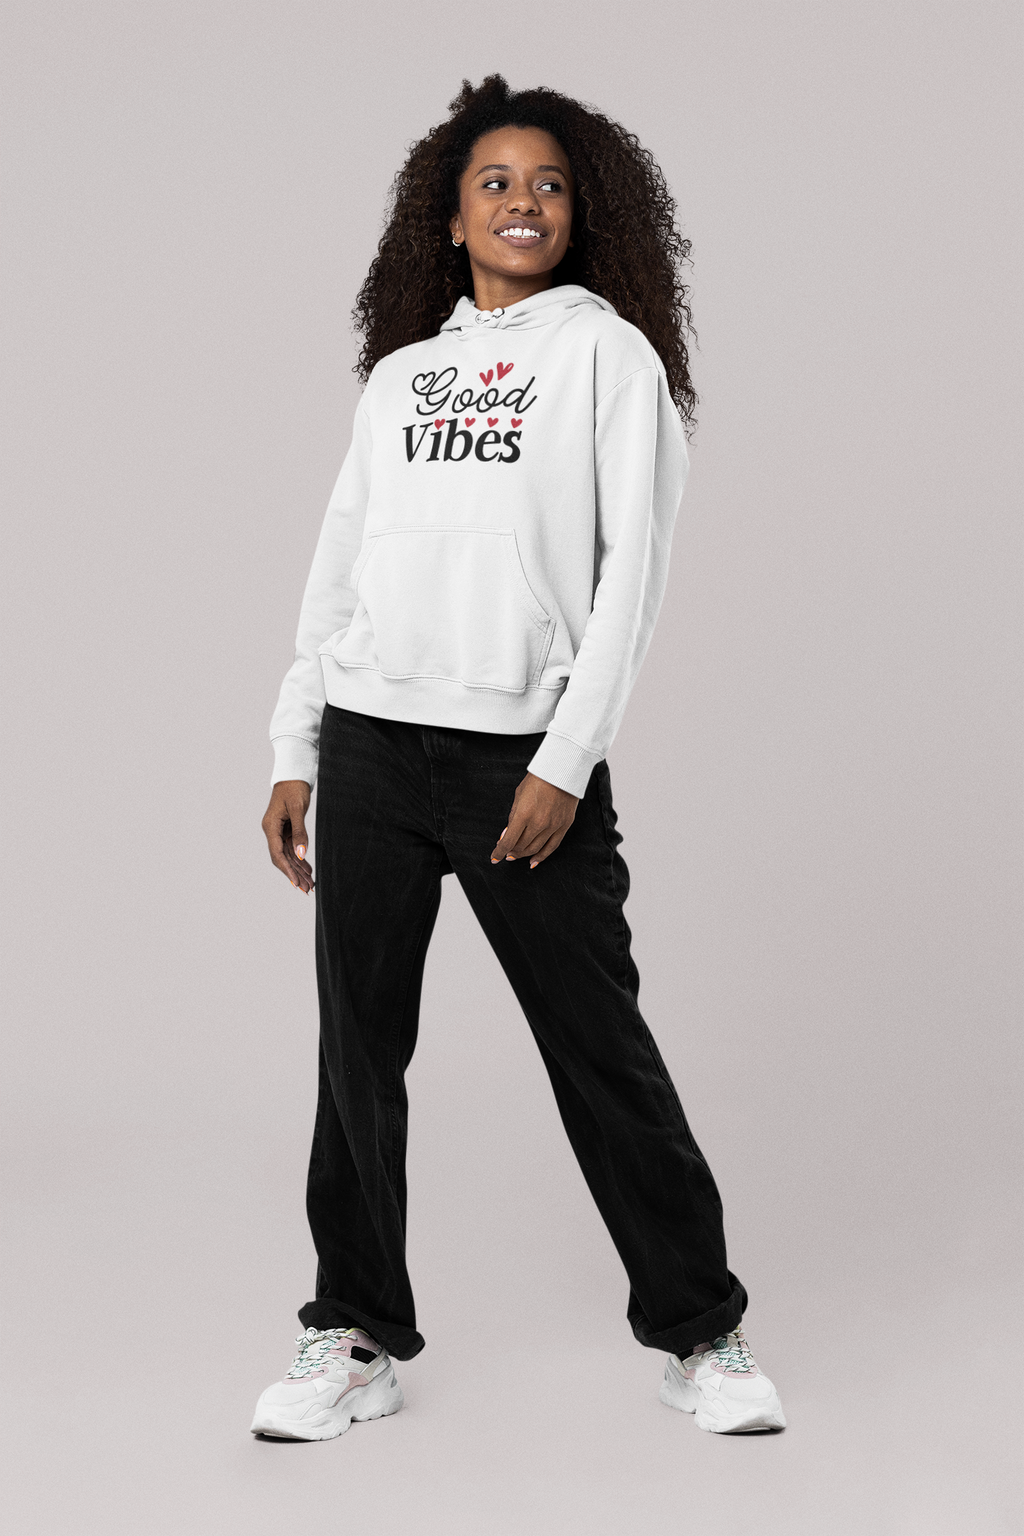 Good Vibes Hoodie - Women Empowerment T-Shirts & Apparel | CP Designs Unlimited